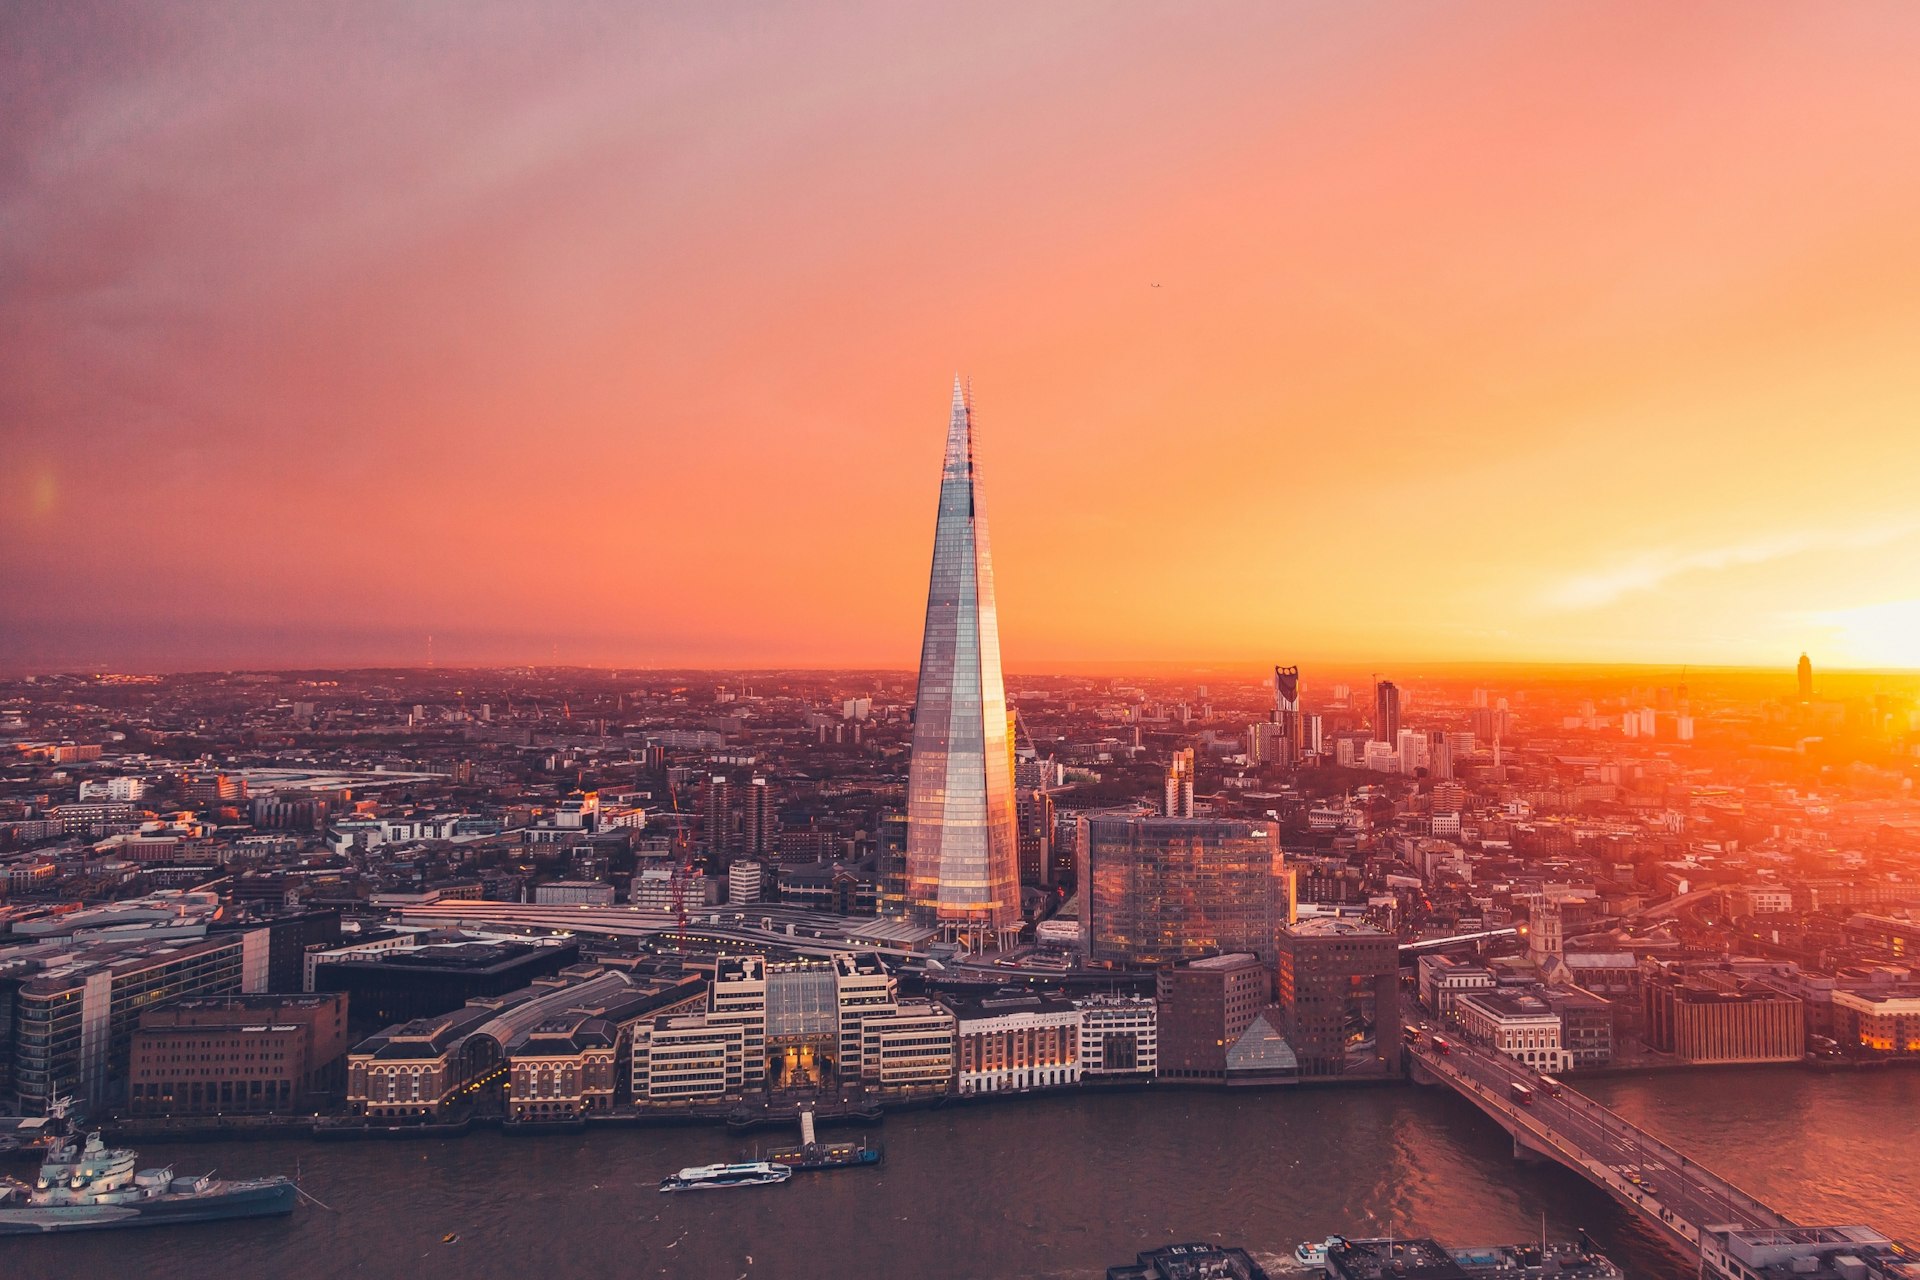 The sun sets behind the Shard in London city.